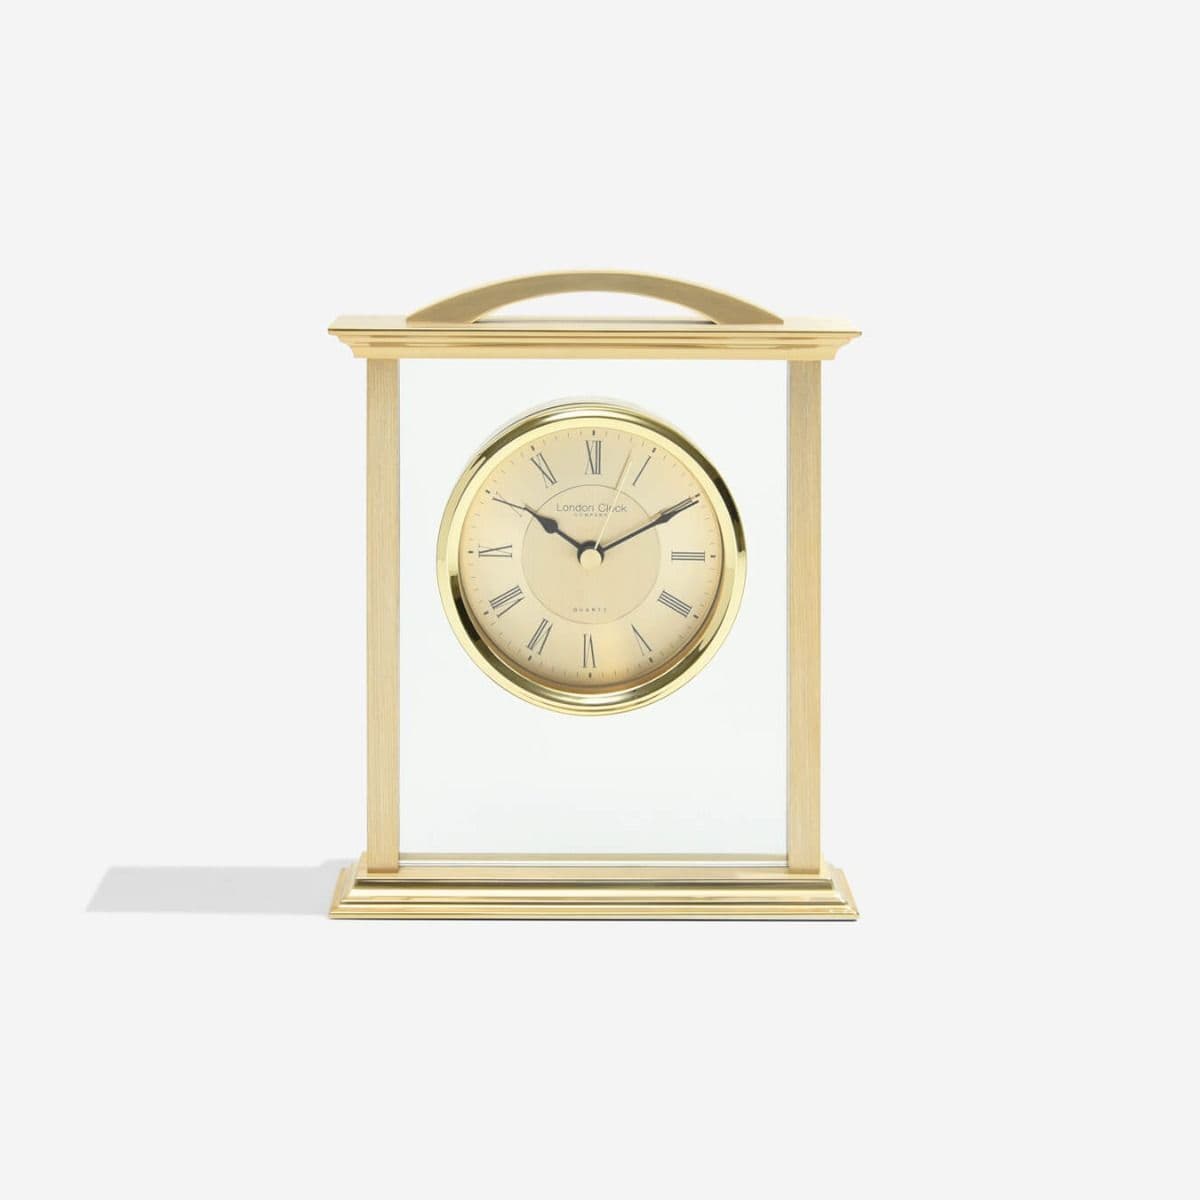 03023 Clock Gold Coloured Curved Handle Metal And Glass Mantle London Clock Company